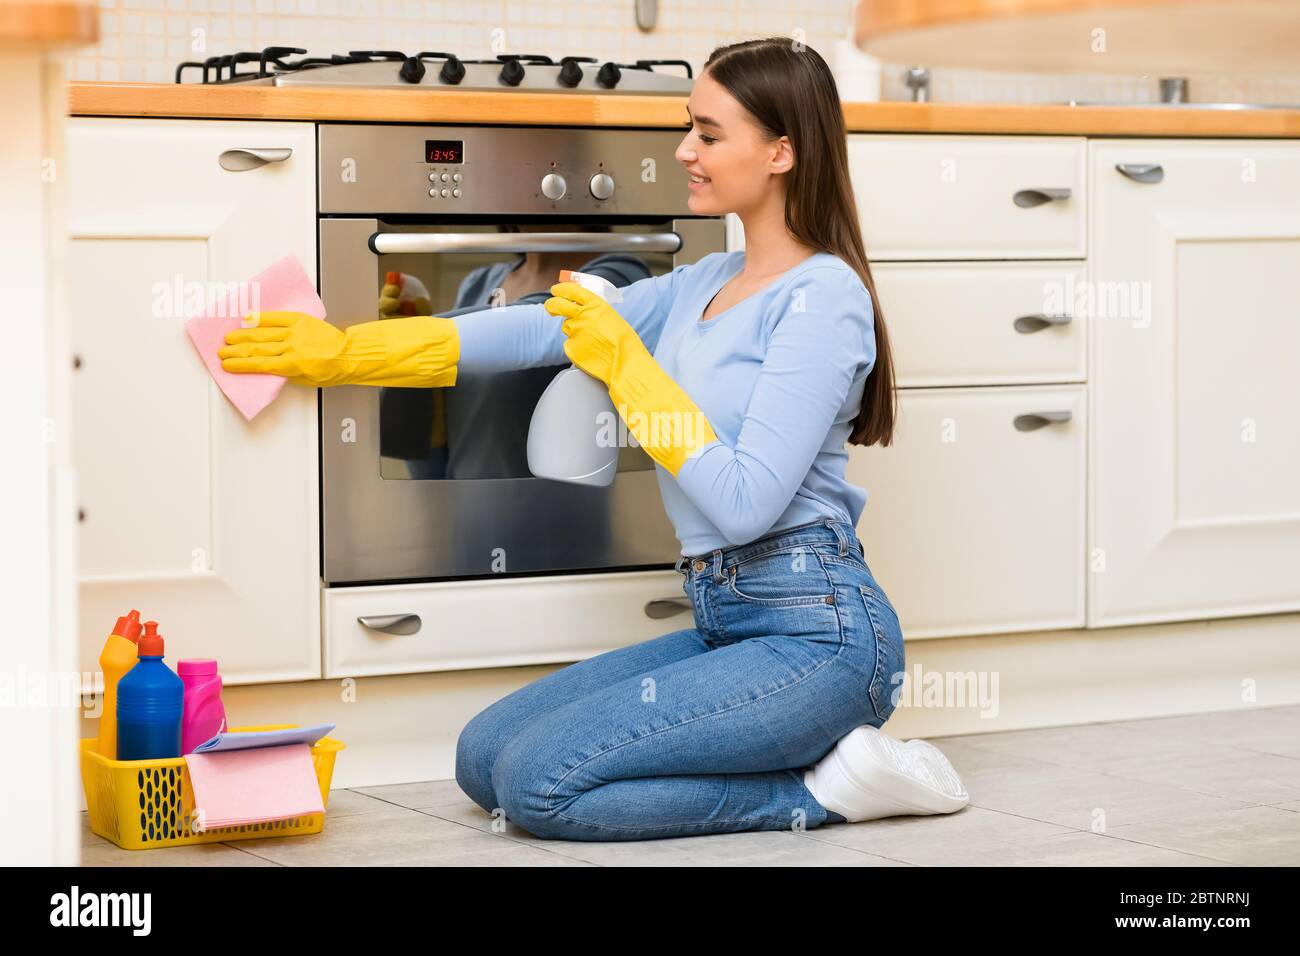 Young woman cleaning kitchen furniture using sprayer Stock Photo